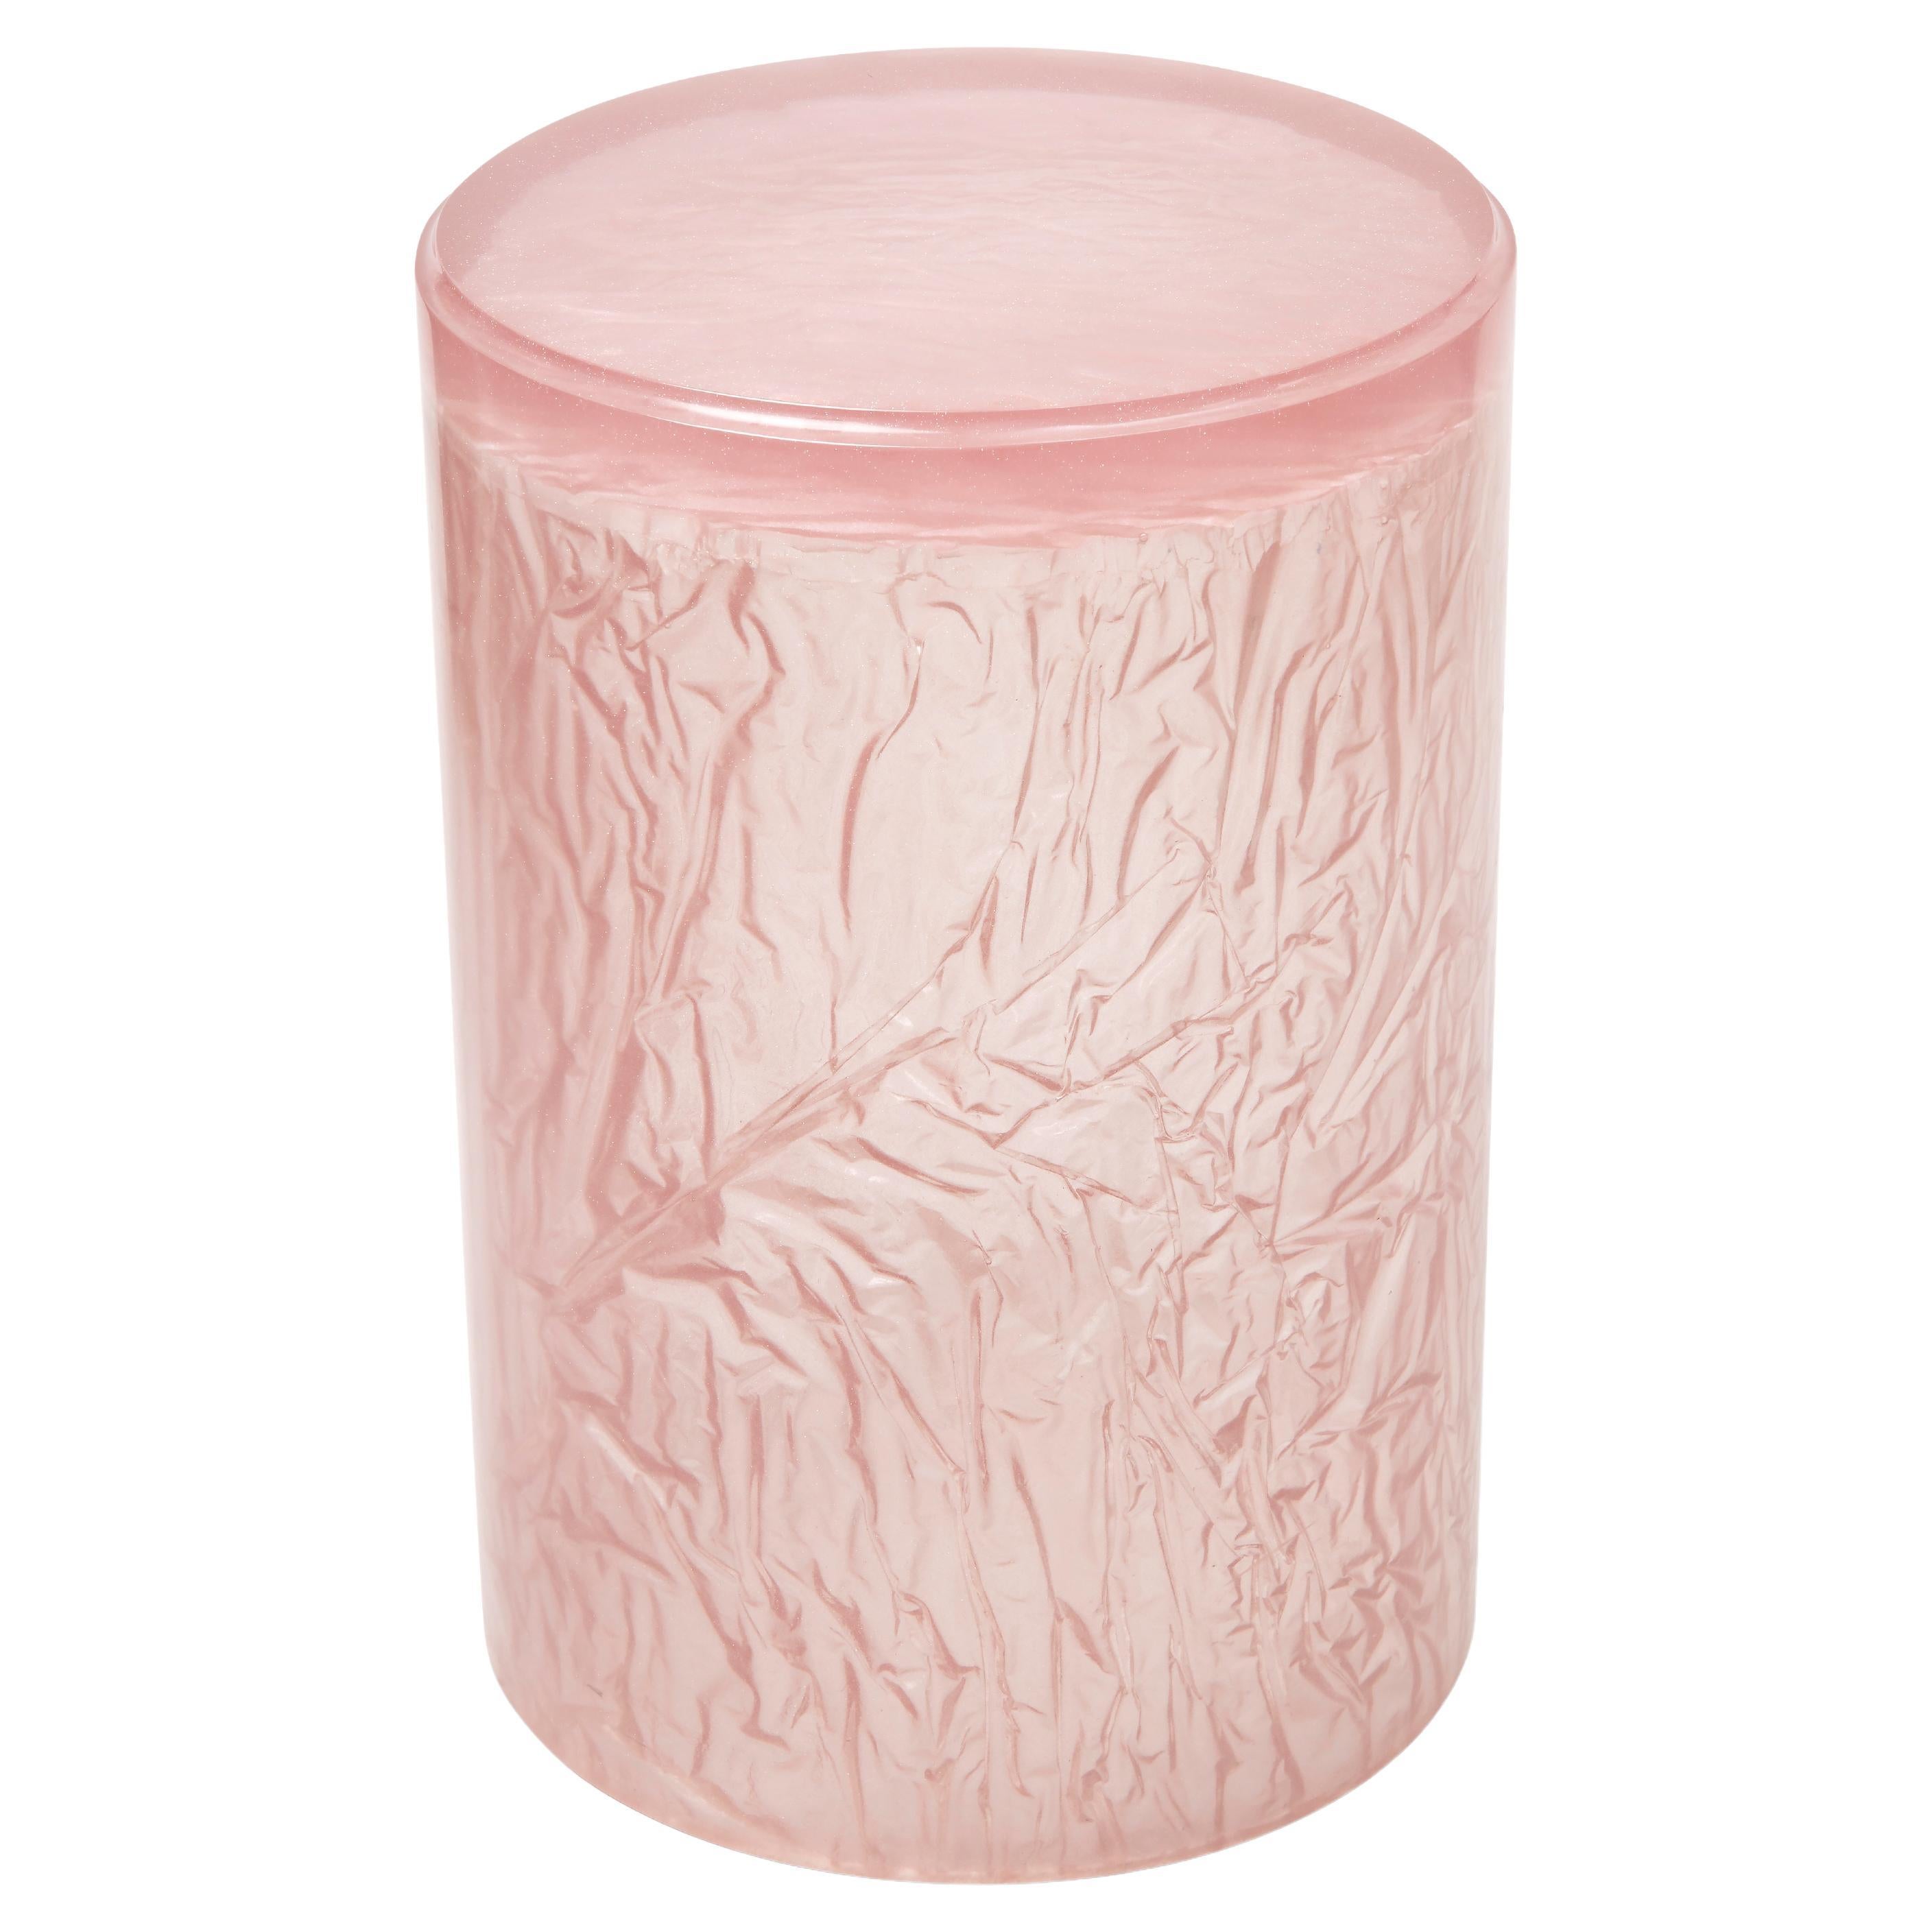 Contemporary Resin Acrylic Side Table or Stool by Natalie Tredgett, gloss, Pink For Sale